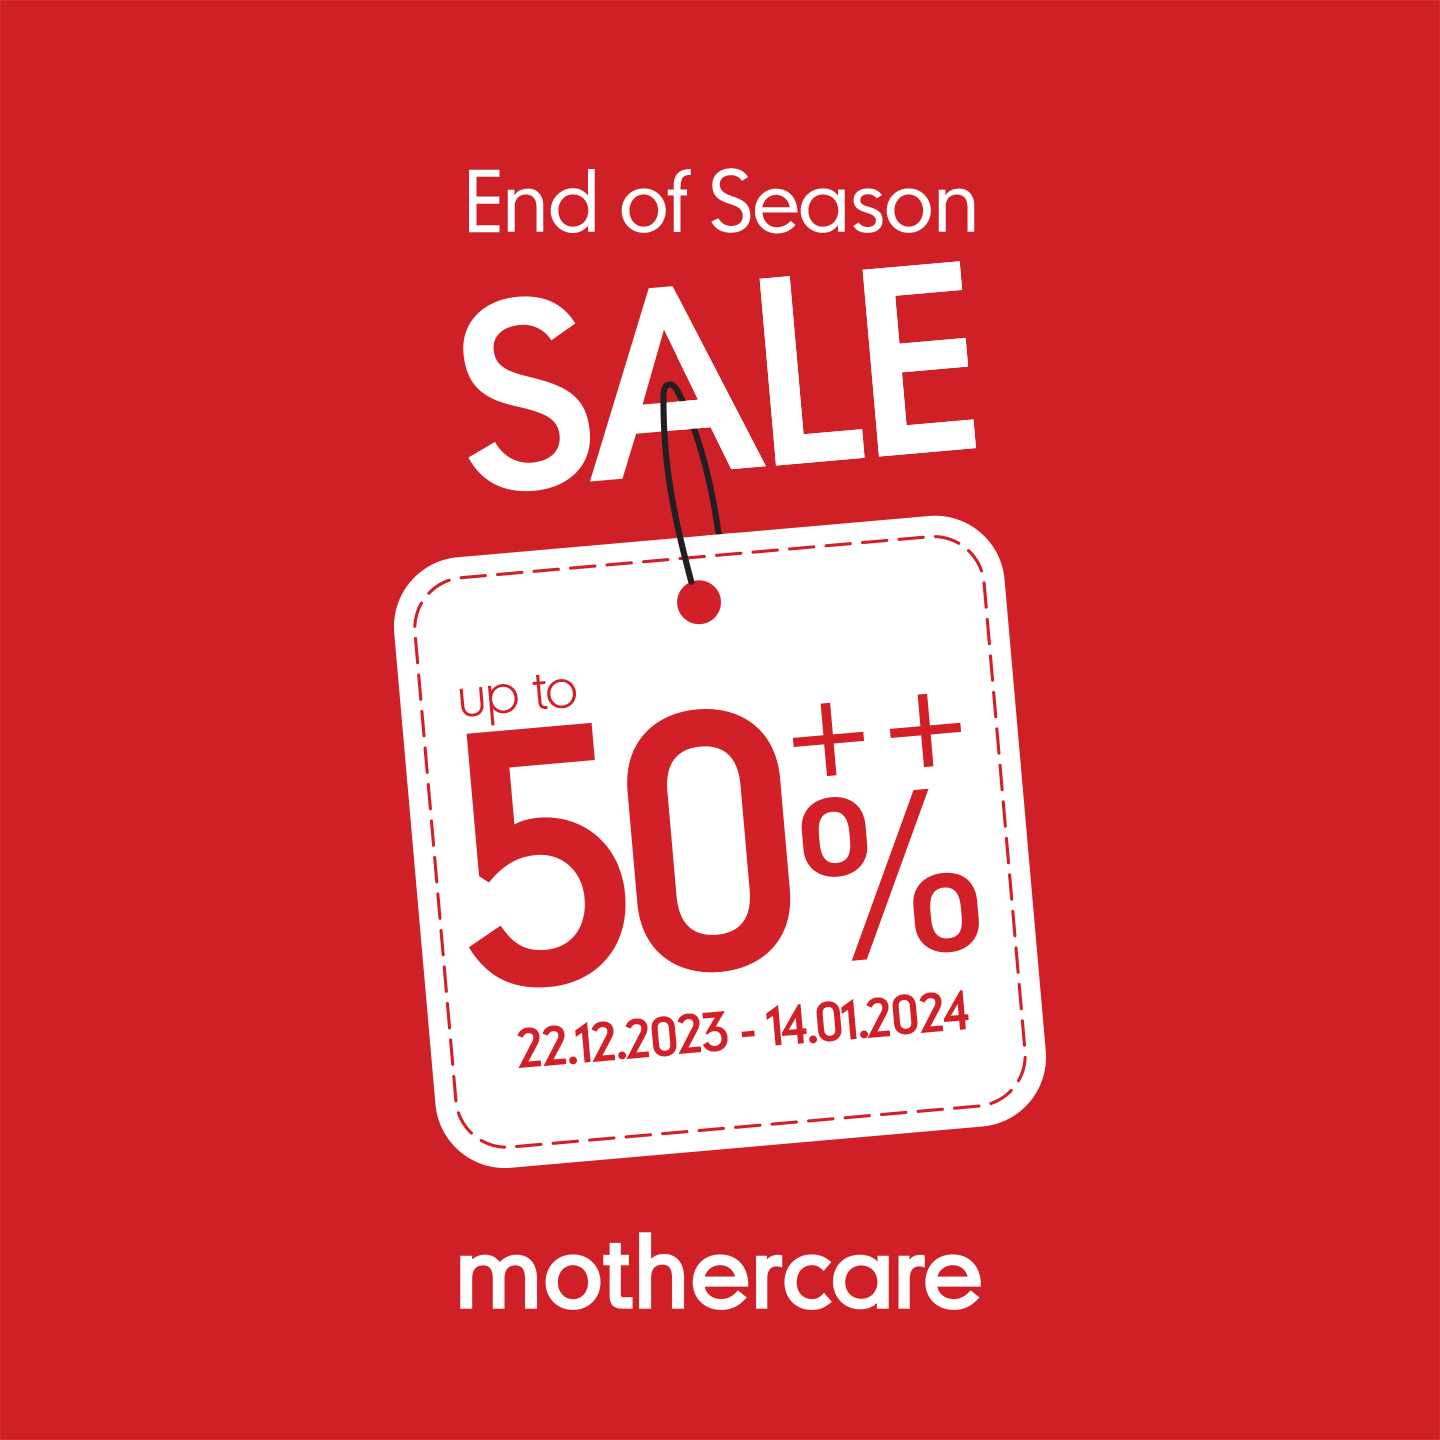 END OF SEASON SALE – MOTHERCARE - EXPLOSIVE YEAR-END PROMOTIONS UP TO 50%++